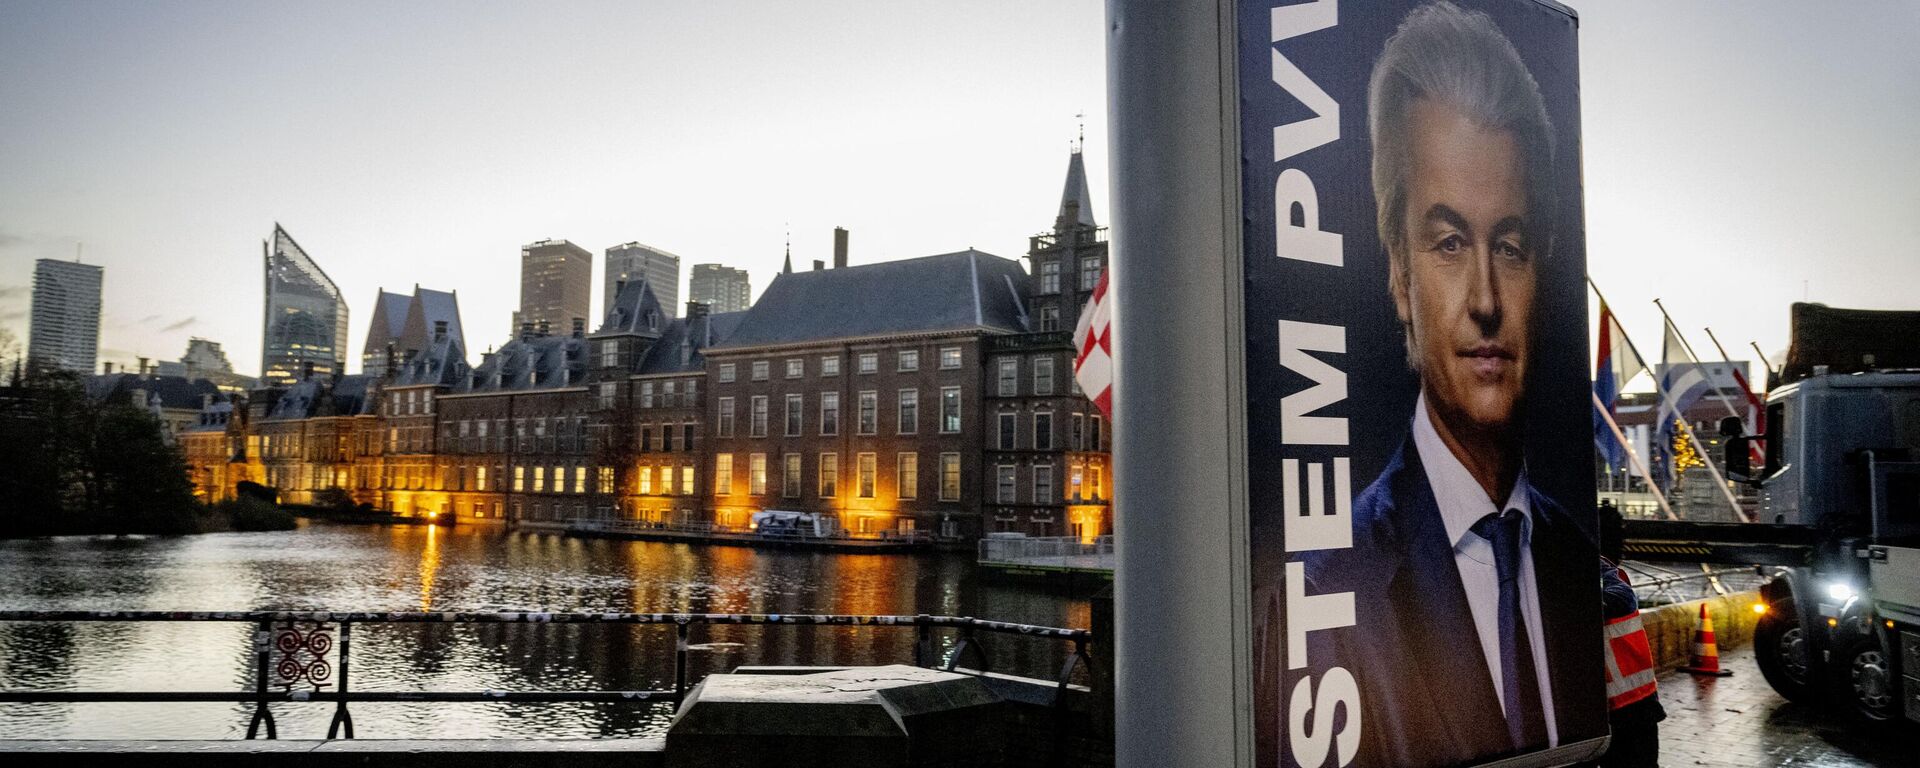 An election sign of Party for Freedom (PVV) leader Geert Wilders is removed near the Binnenhof, a day after the Netherlands general elections, in the Hague on November 23, 2023.  - Sputnik International, 1920, 23.11.2023